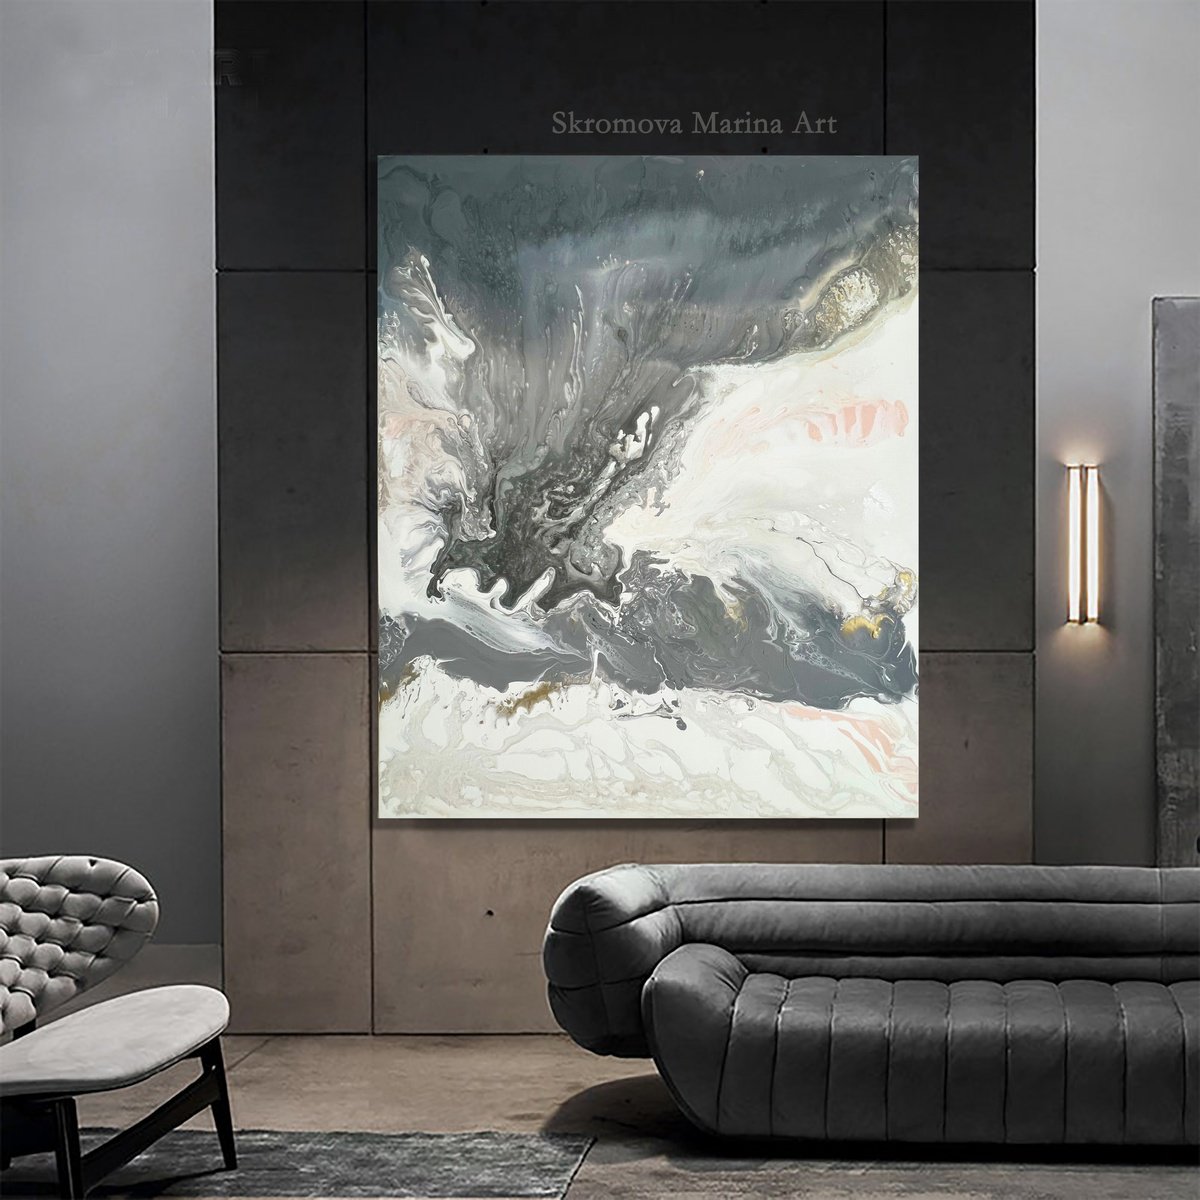 110x90cm. / abstract painting / Abstract black white gold. Light and darkness. Tornado by Marina Skromova